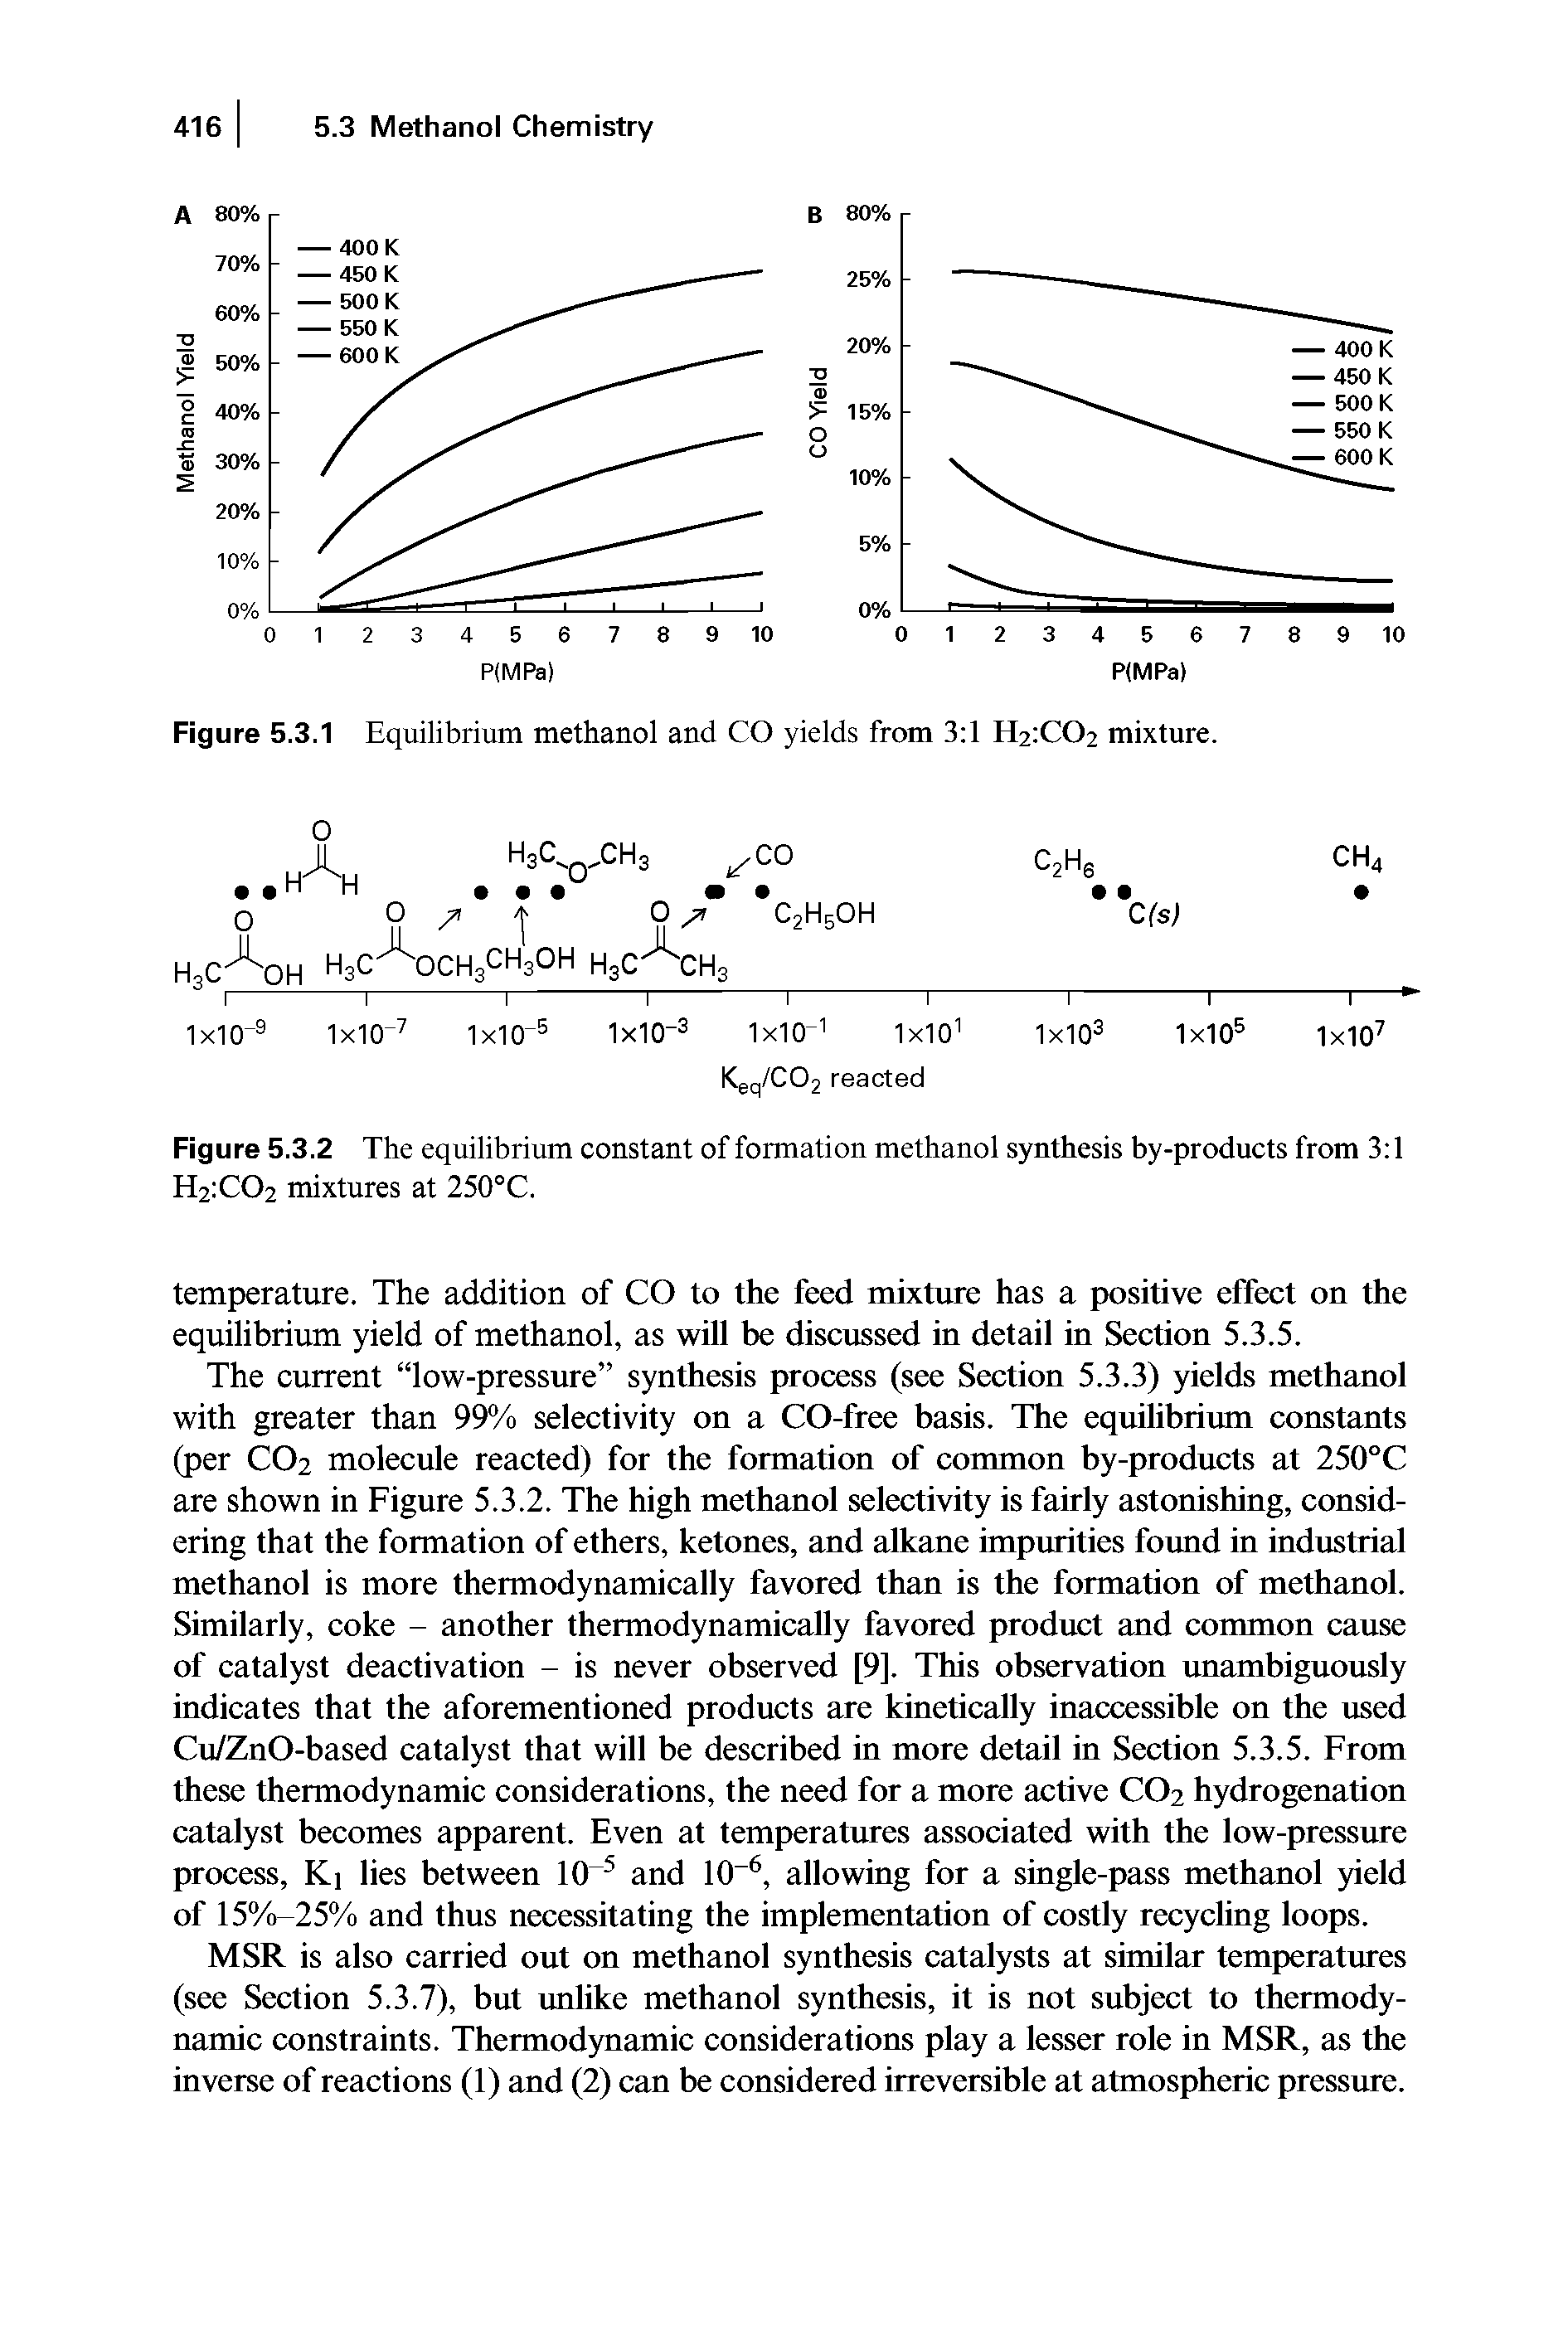 Figure 5.3.2 The equilibrium constant of formation methanol synthesis by-products from 3 1 H2 C02 mixtures at 250°C.